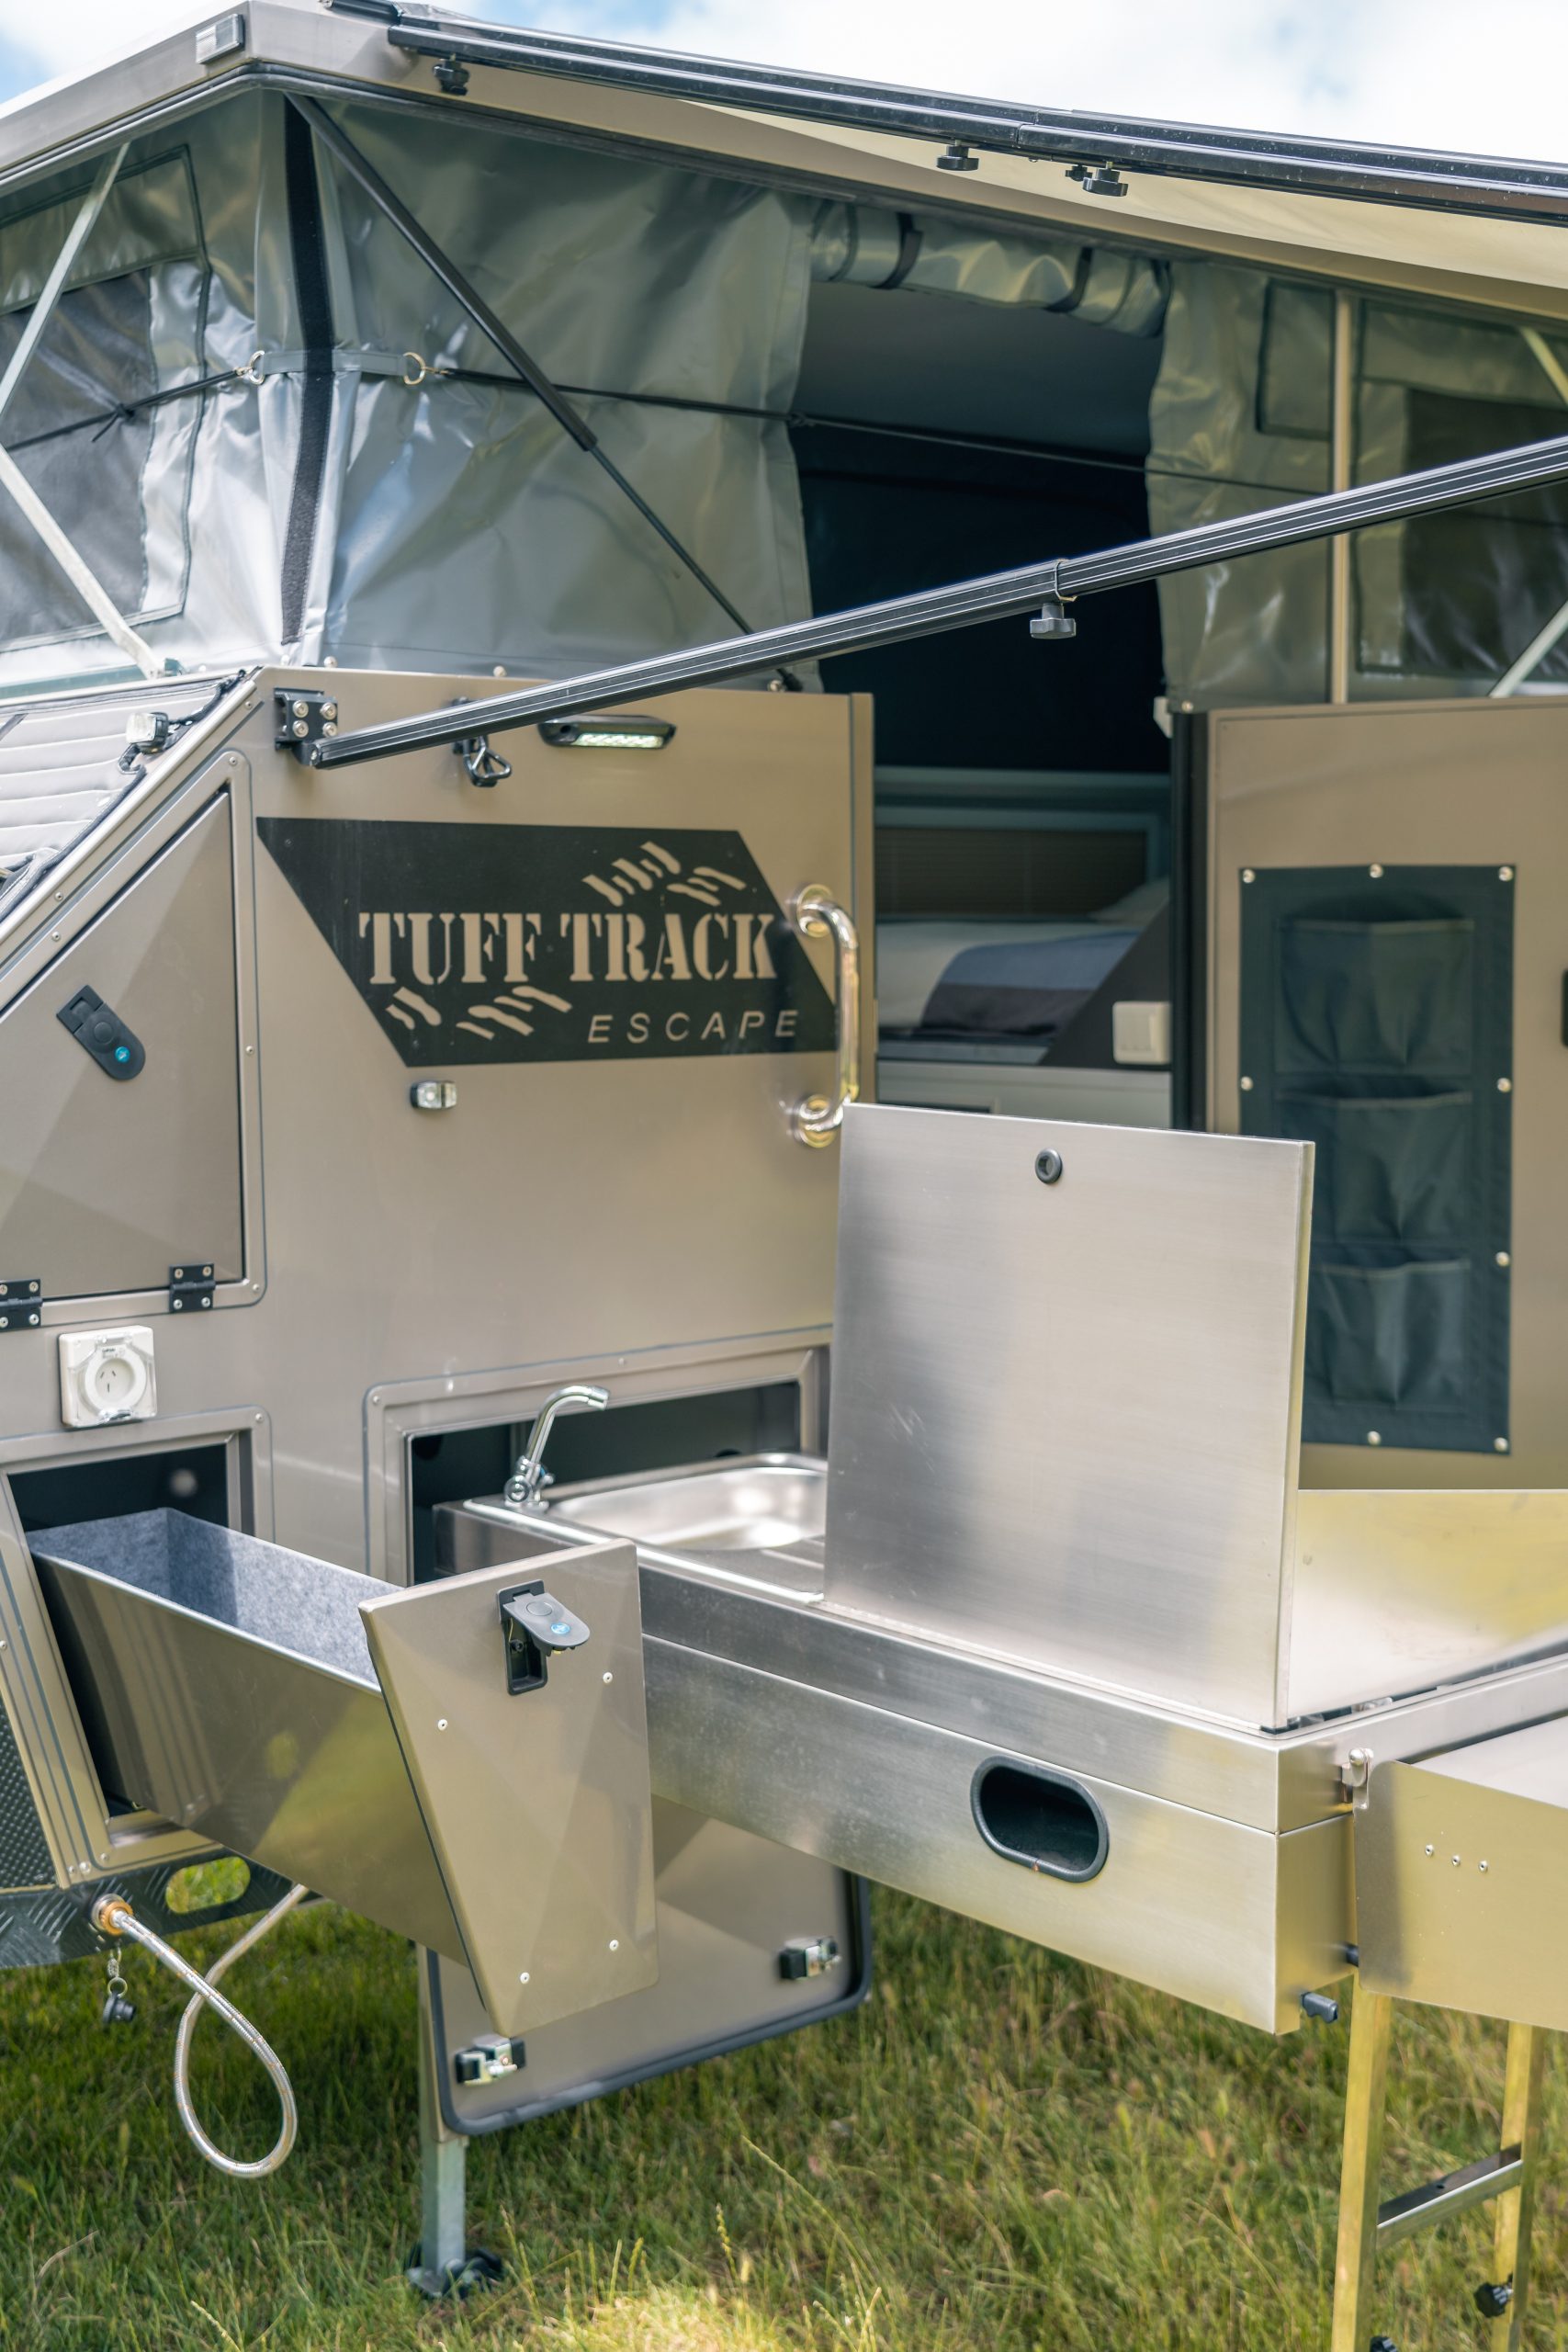 Tuff Track Escape Overland Camper Boasts Extended Family Features for a ...